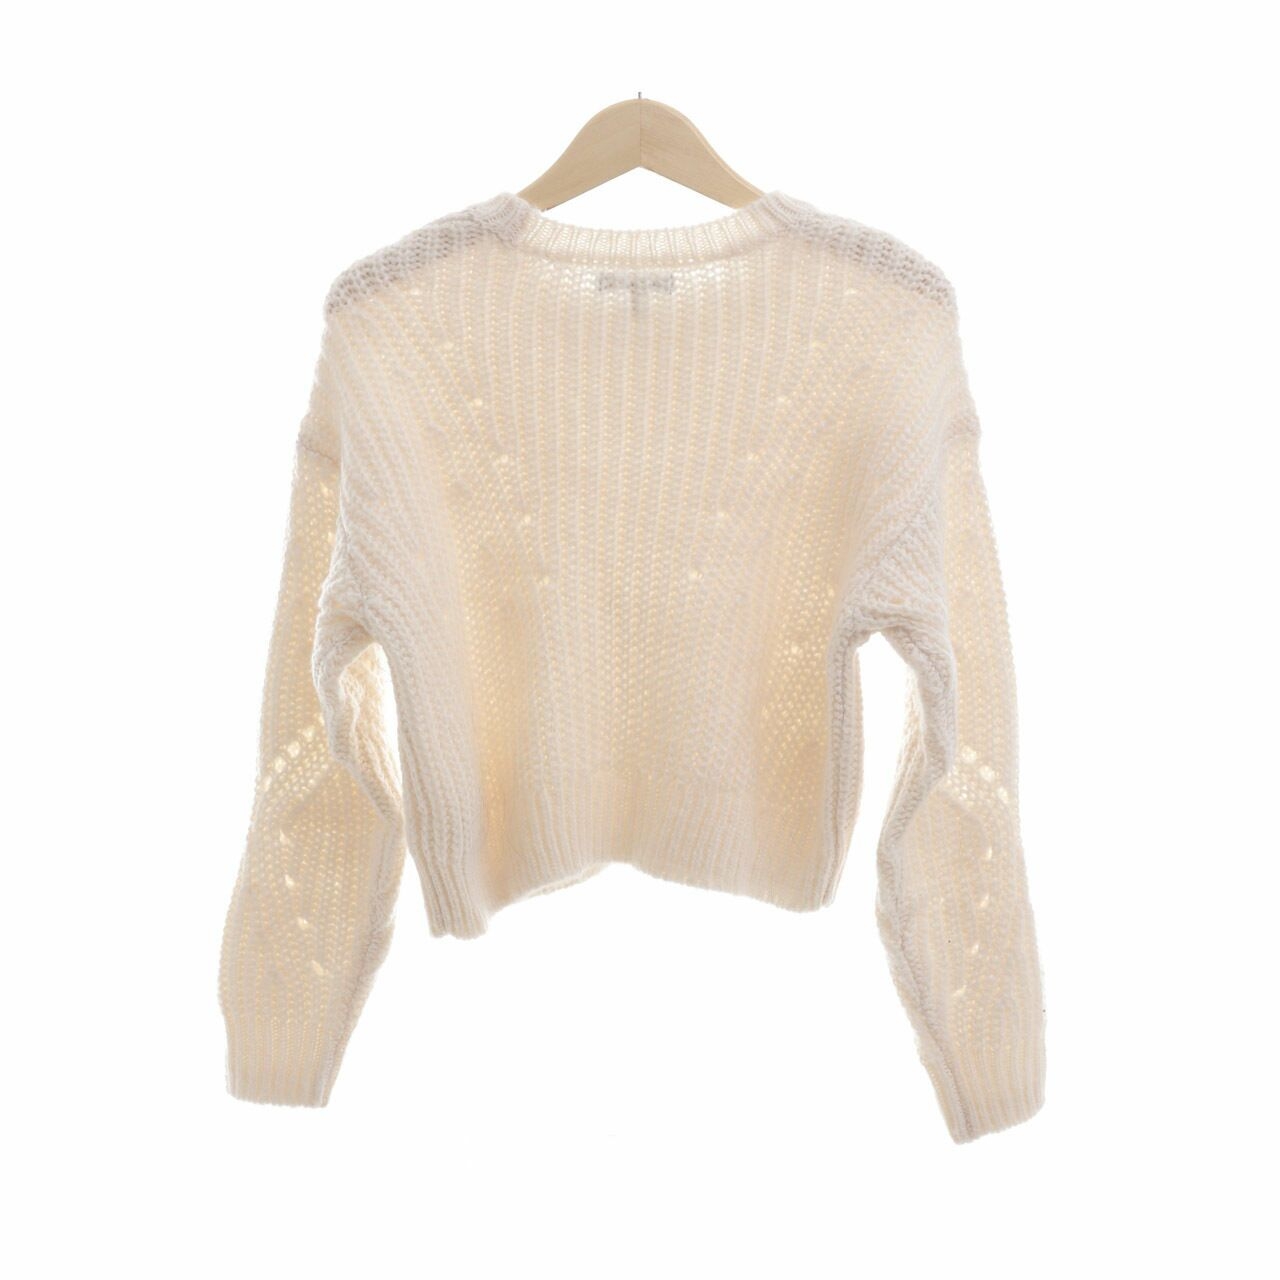 Kendall + Kylie Off White Knit Sweater